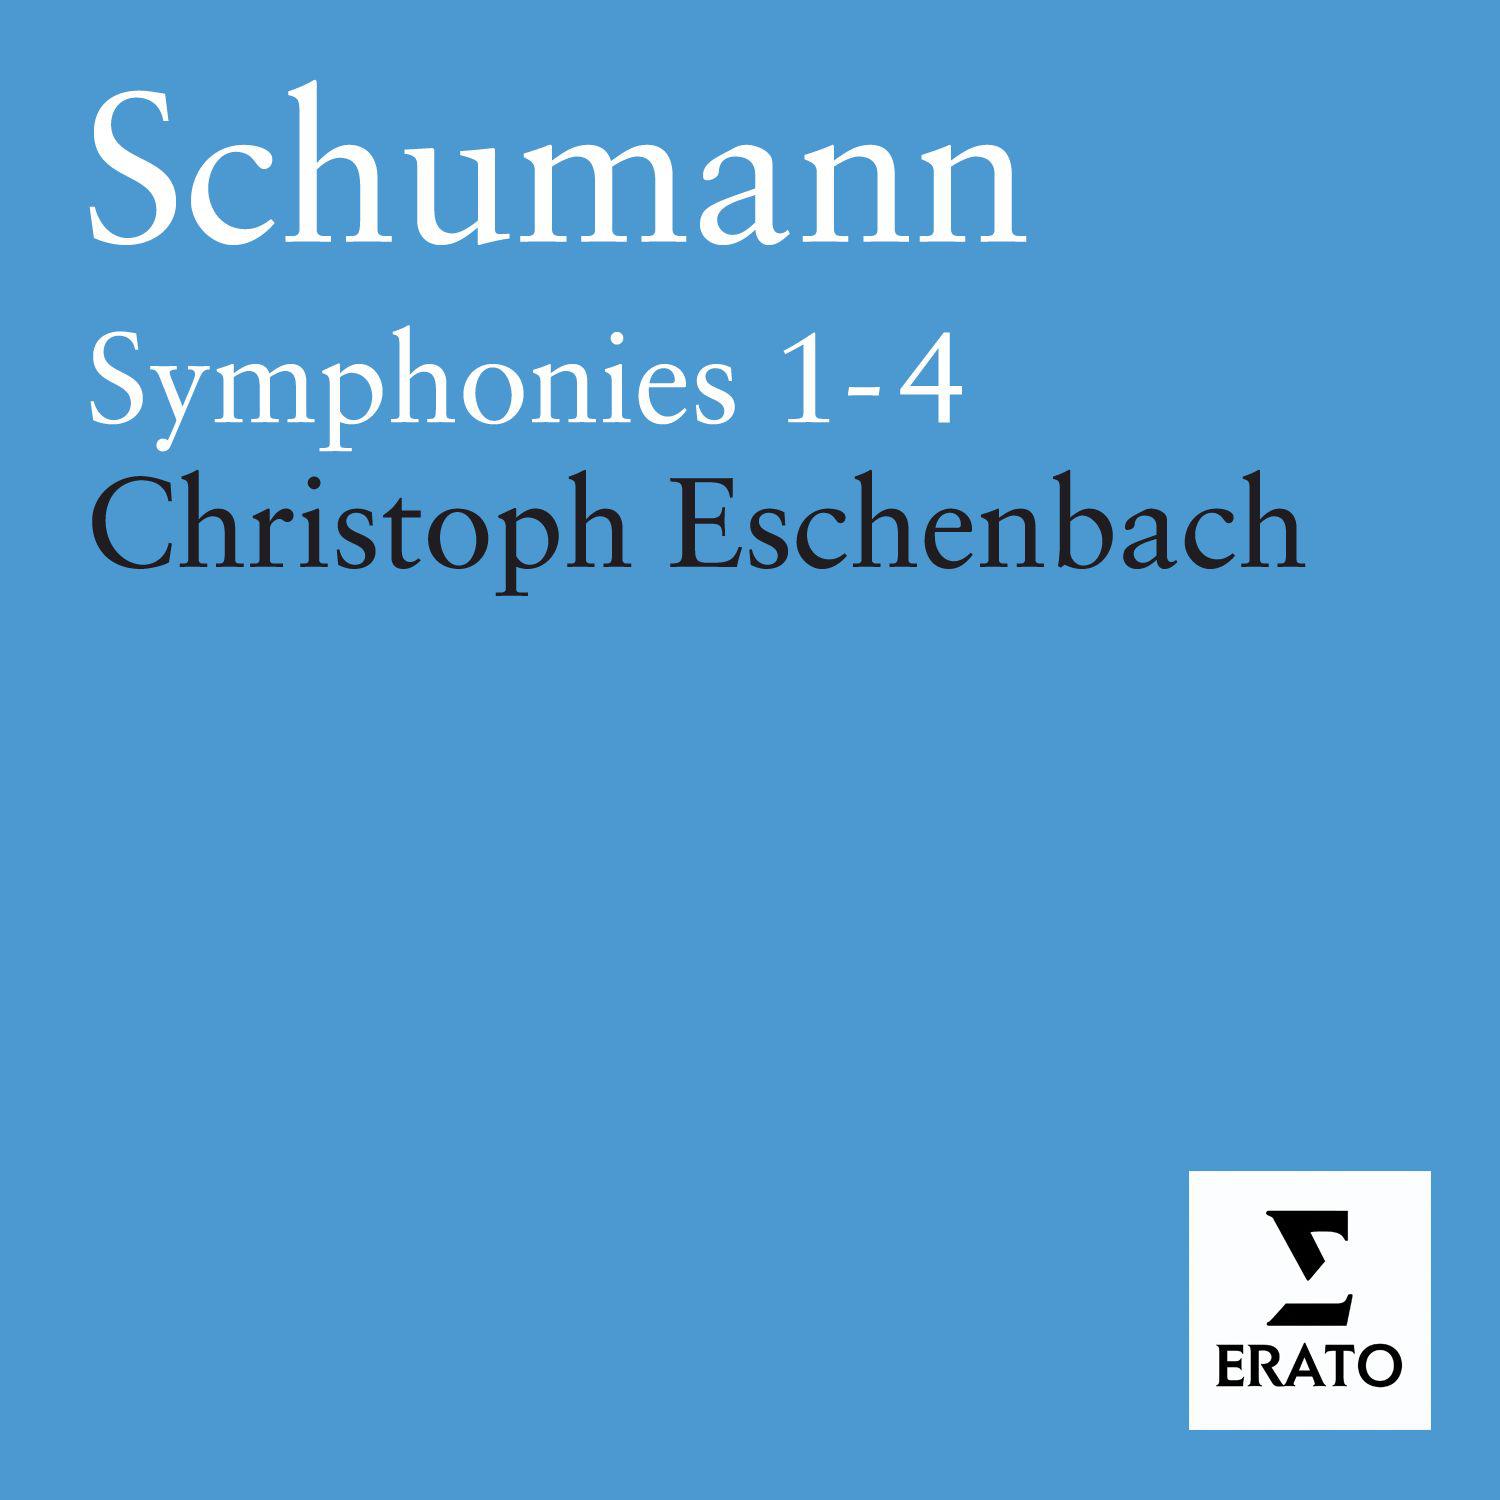 Symphony No. 1 in B-Flat Major, Op. 38, "Spring": II. Larghetto